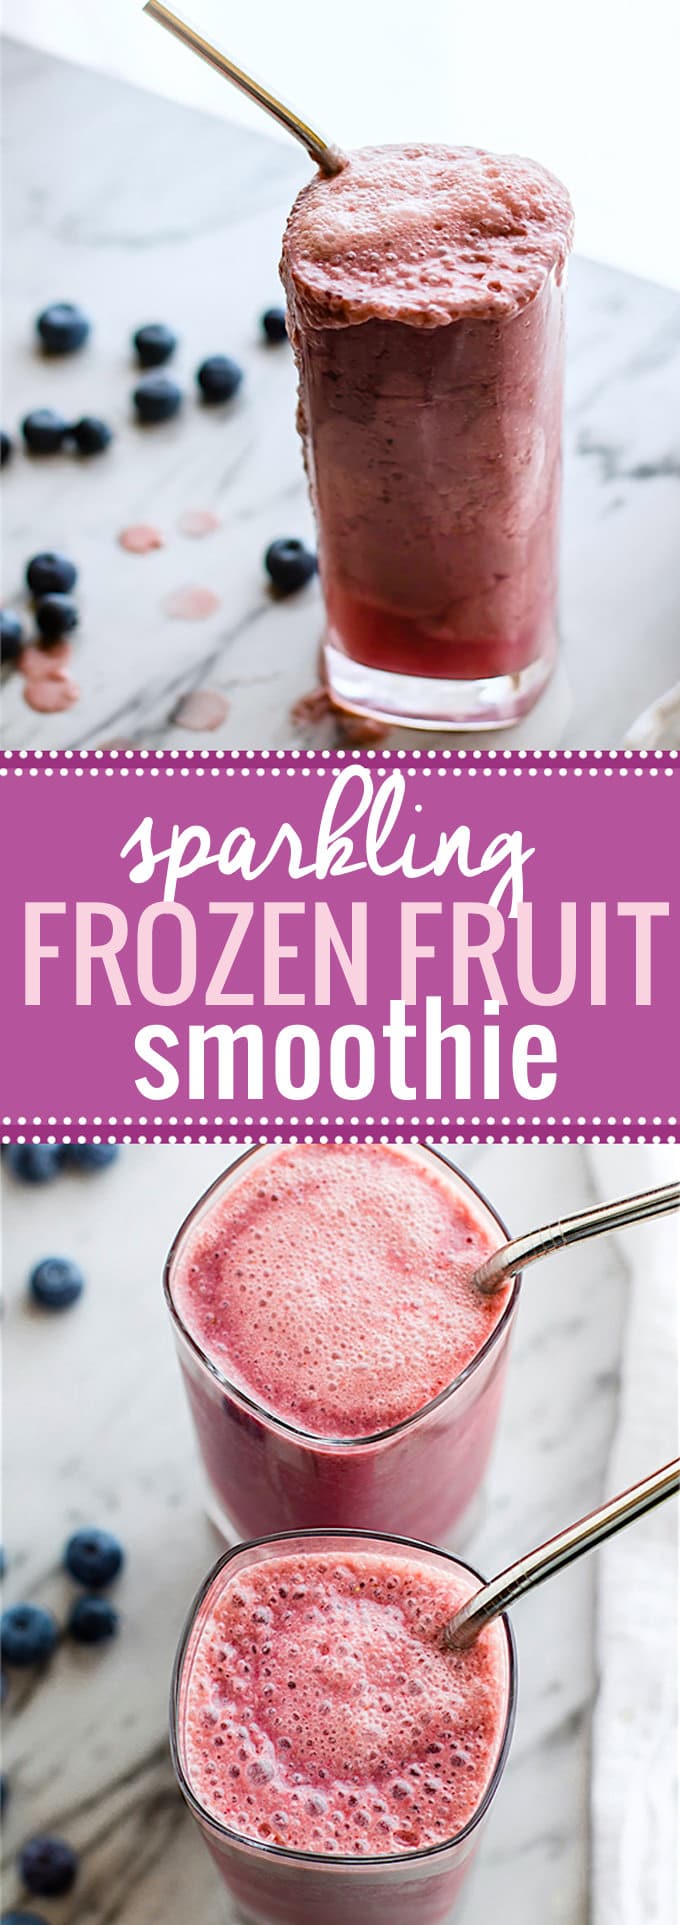 5 ingredient Sparkling Frozen Fruit Smoothie! This frozen fruit smoothie is the perfect Healthy summer refresher. No ice needed. Paleo and Vegan friendly @cottercrunch